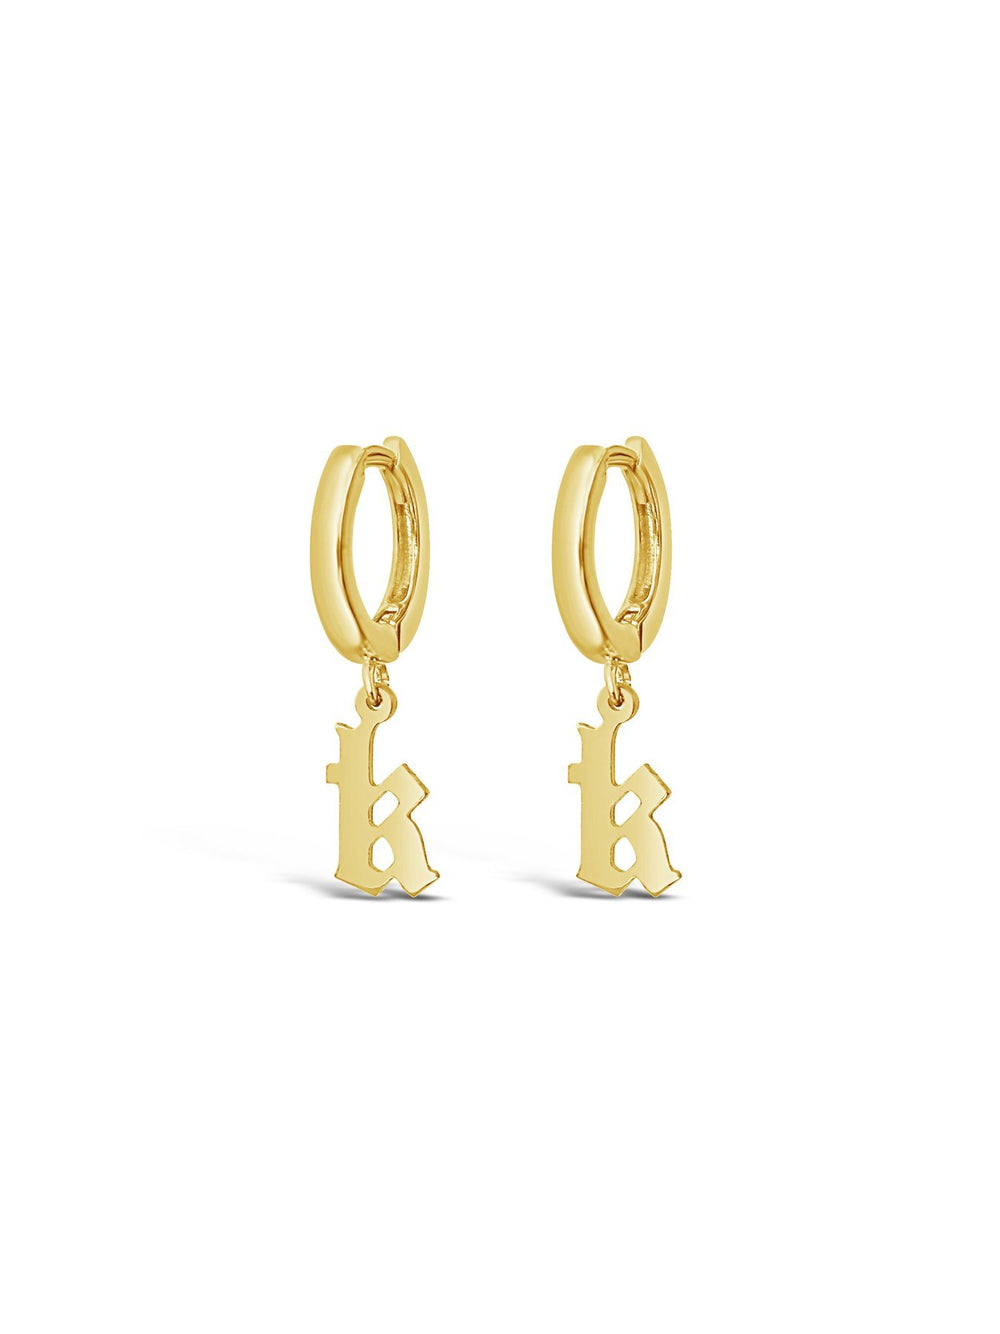 Gothic Initial Earrings - Lucky Eleven